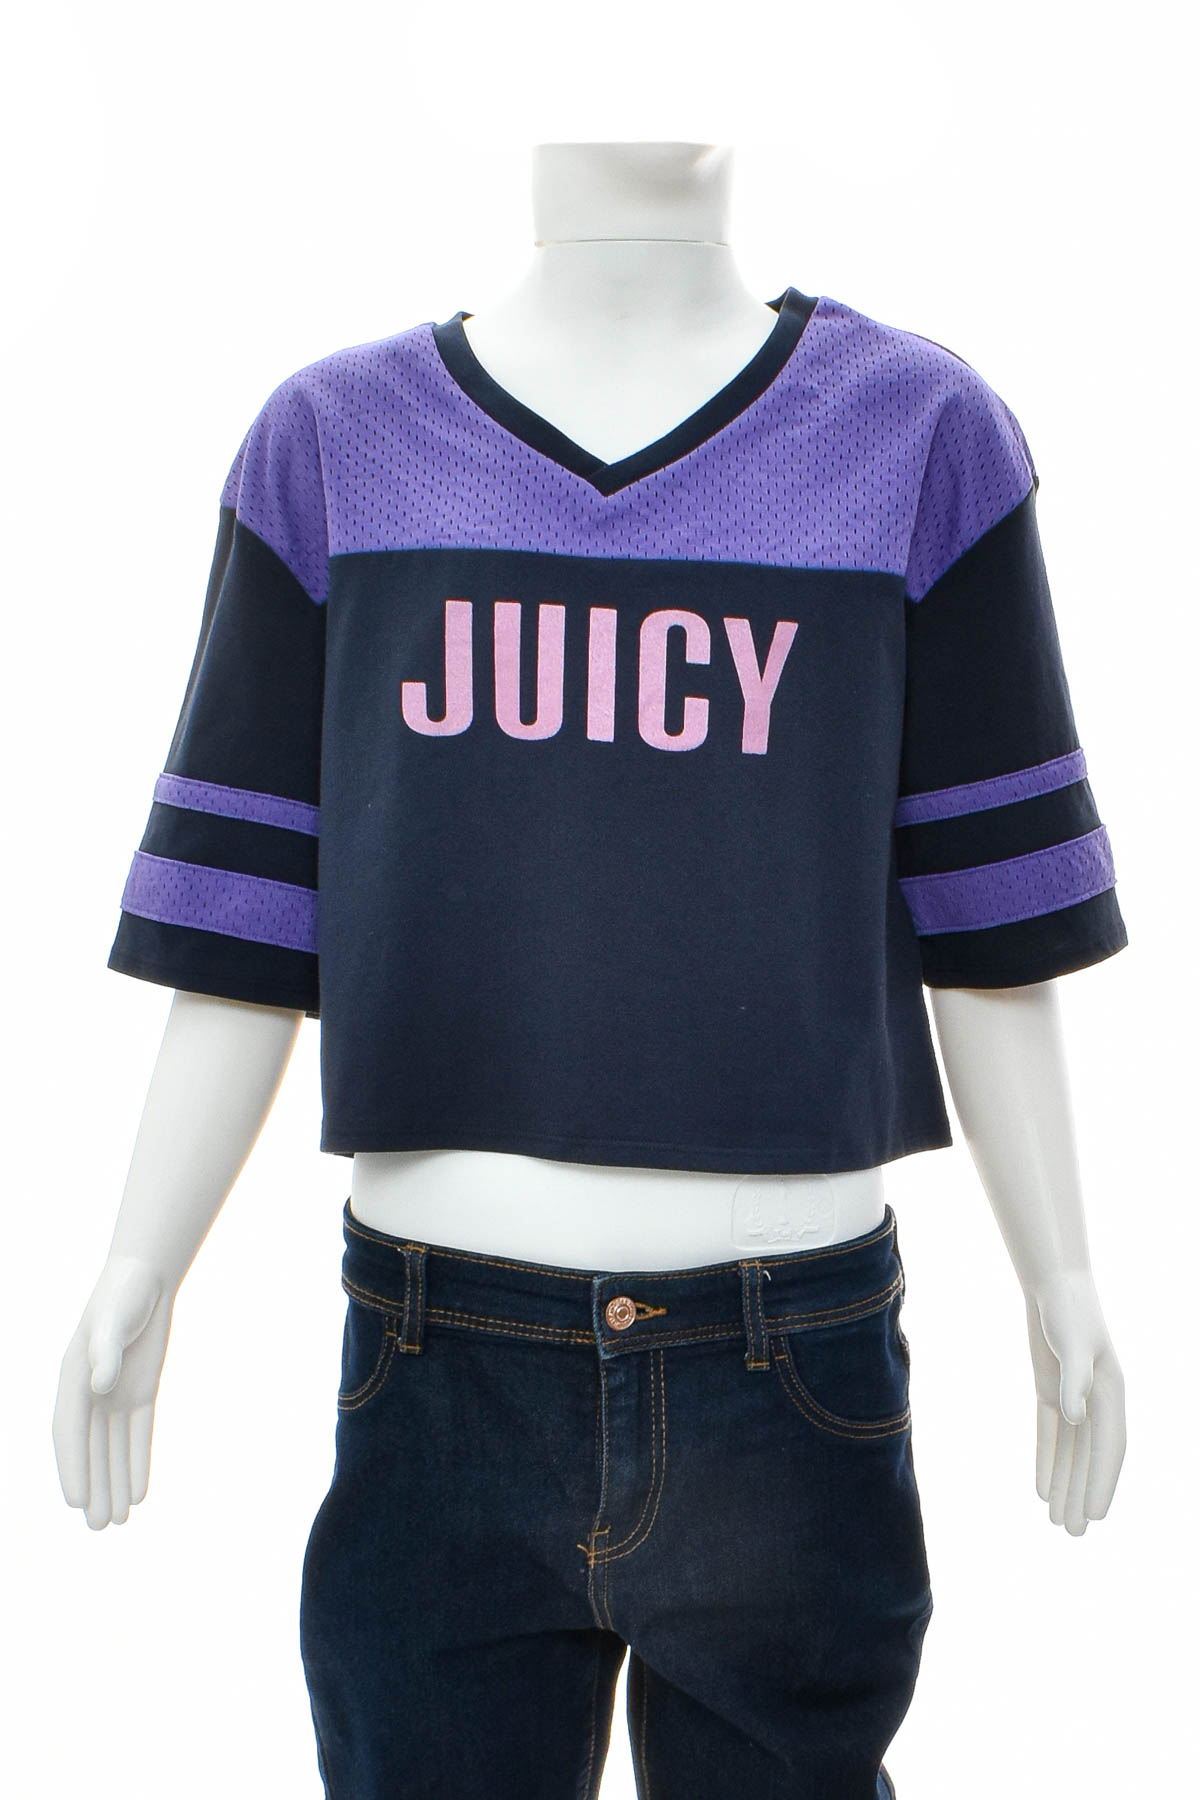 T-shirt για κορίτσι - JUICY BY JUICY COUTURE - 0